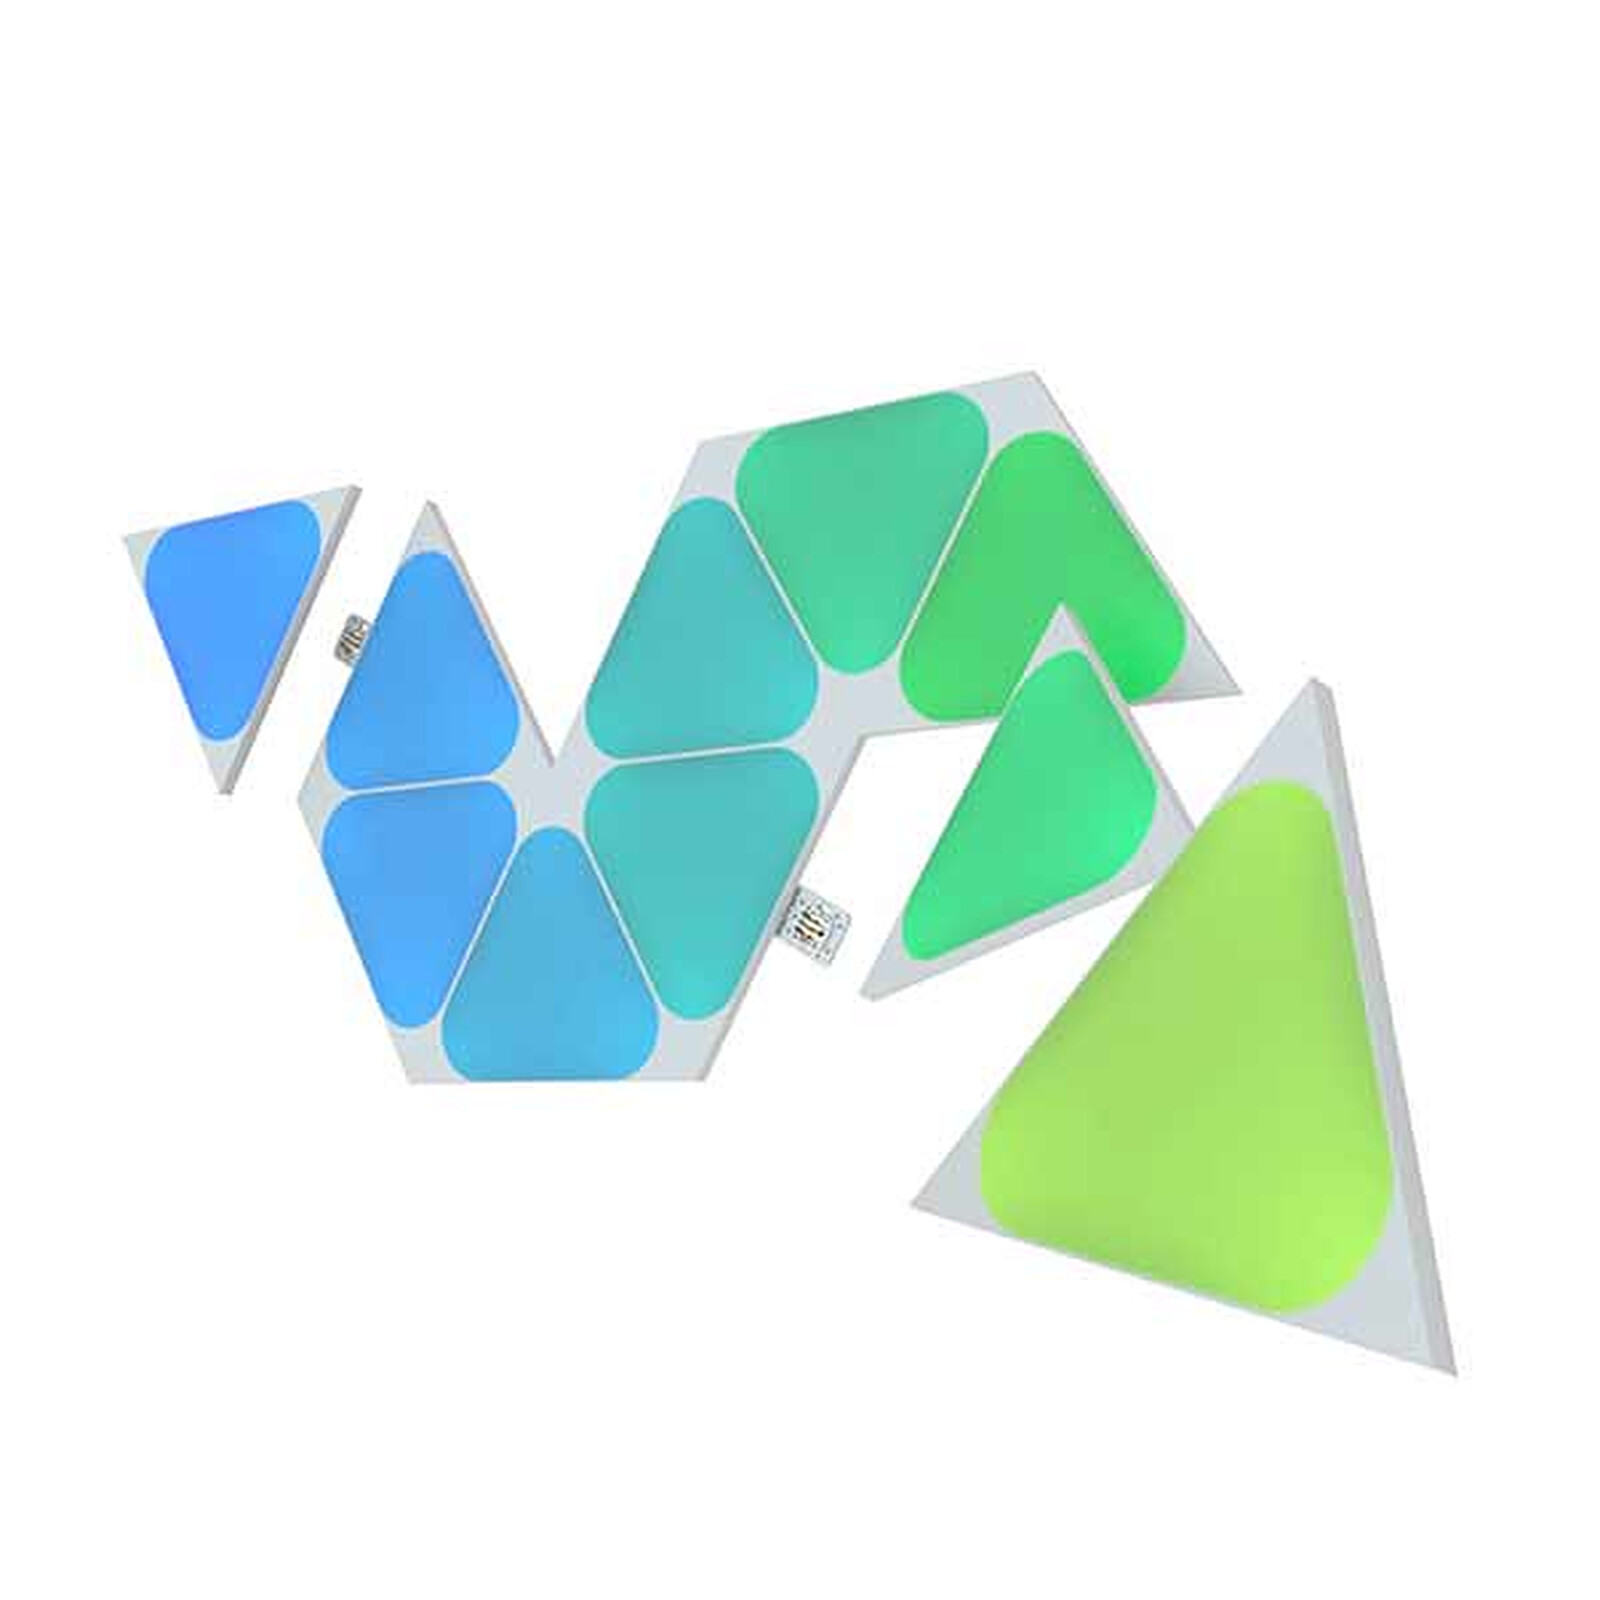 Nanoleaf Shapes Mini Triangles Expansion Pack (10 pieces) Smart lamp  LDLC 3-year warranty